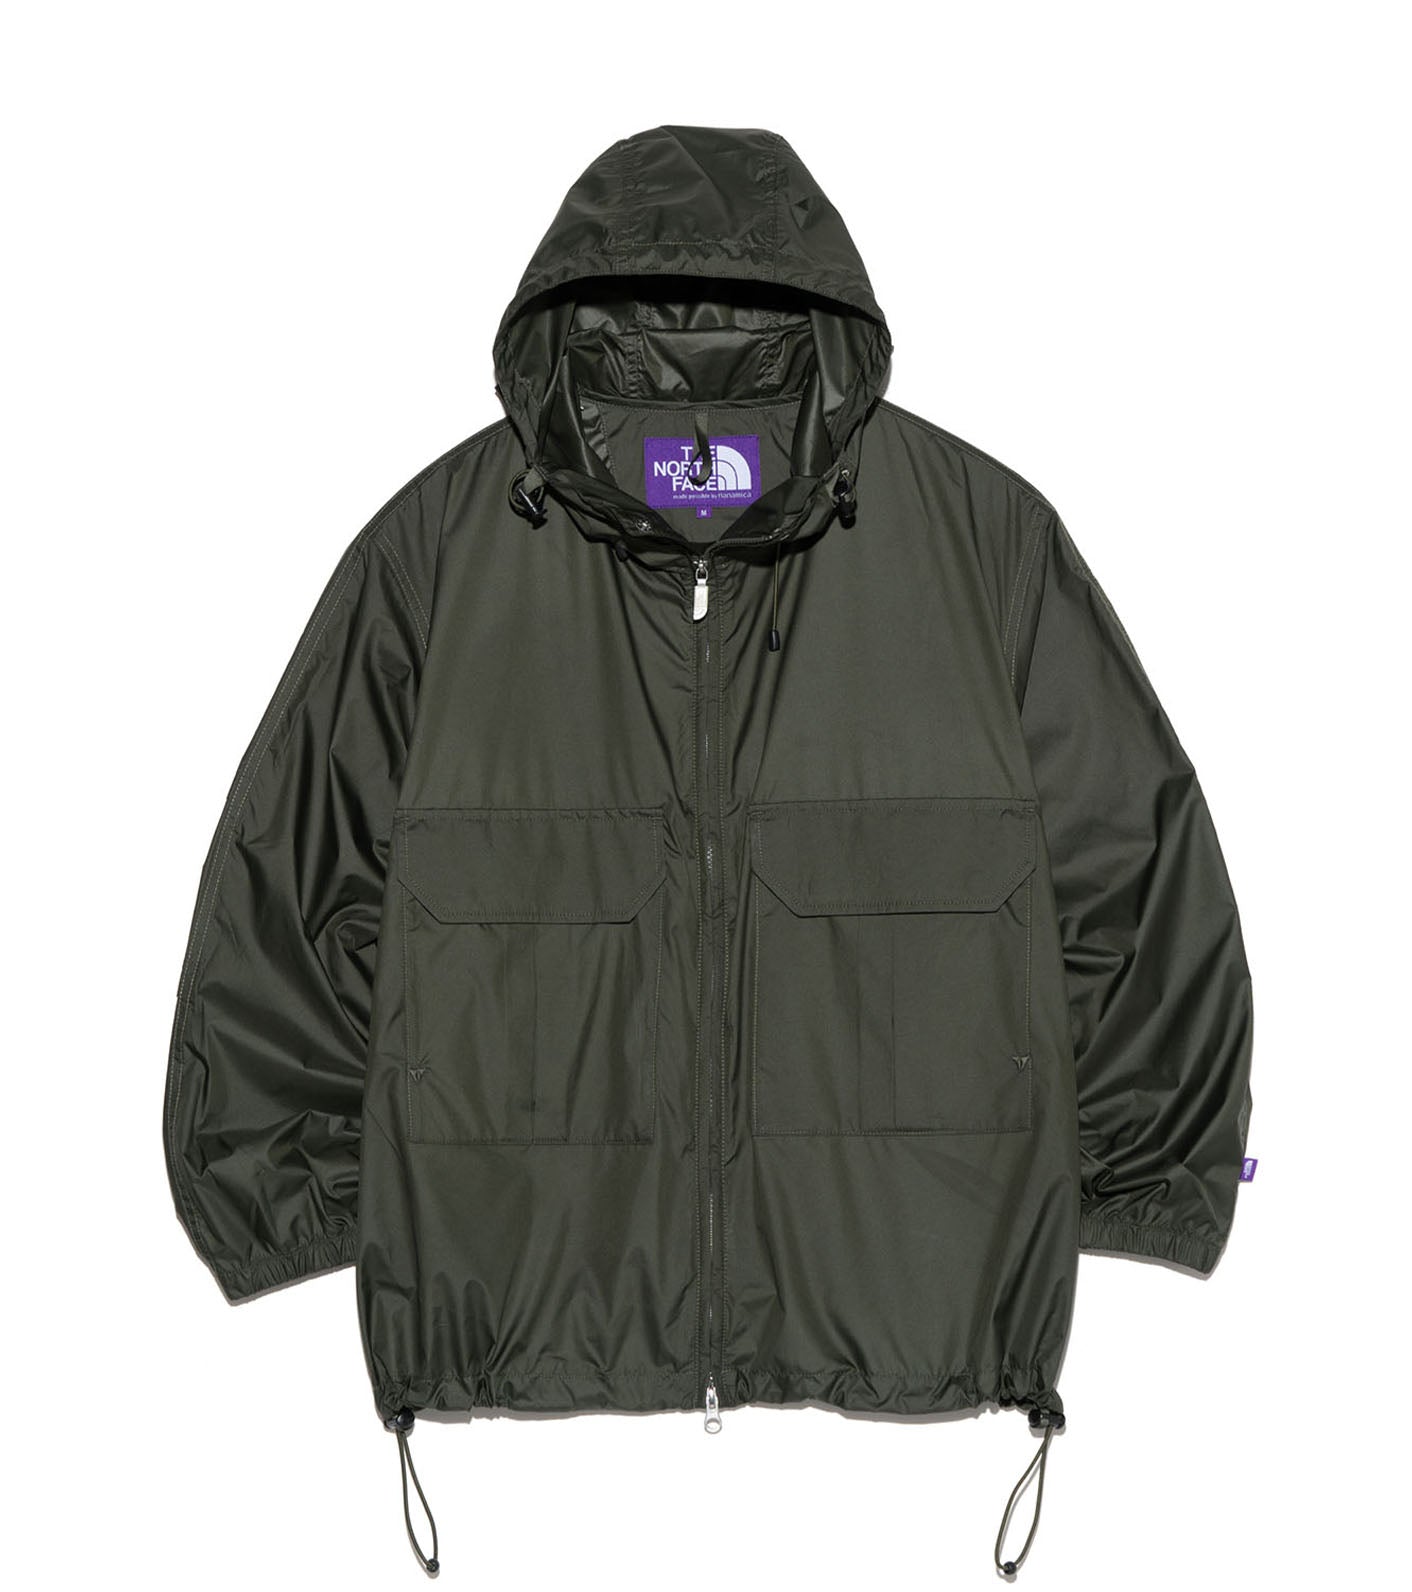 THE NORTH FACE PURPLE LABEL – unexpected store